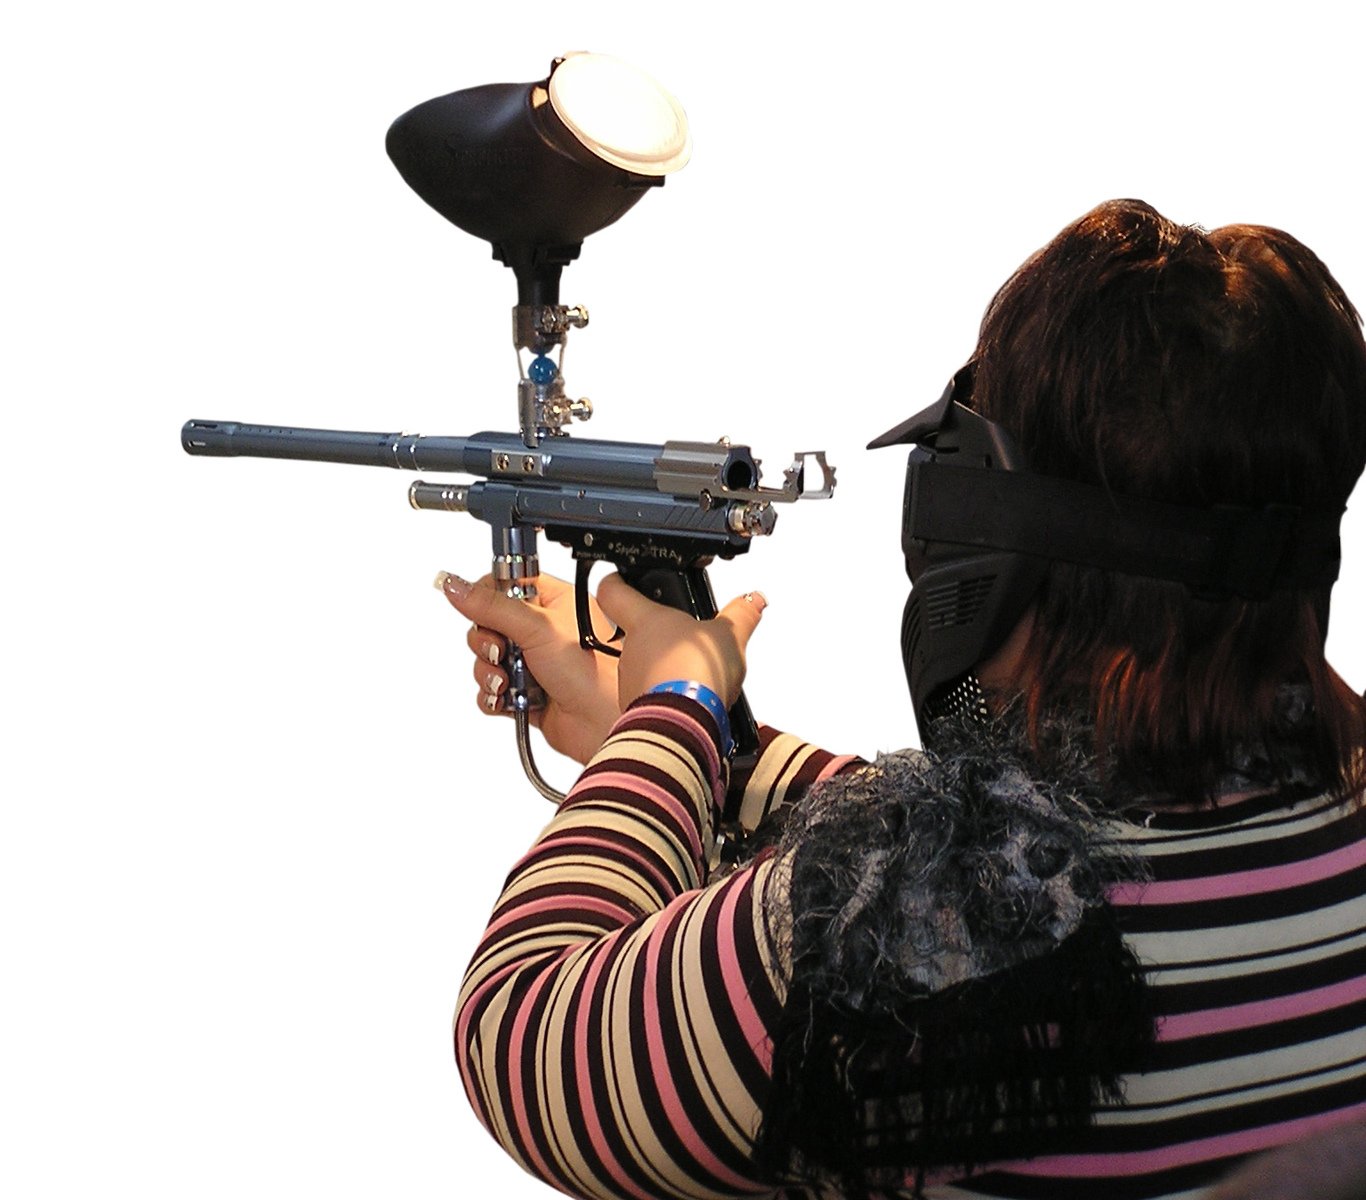 a woman is holding an air rifle with one hand on her shoulder